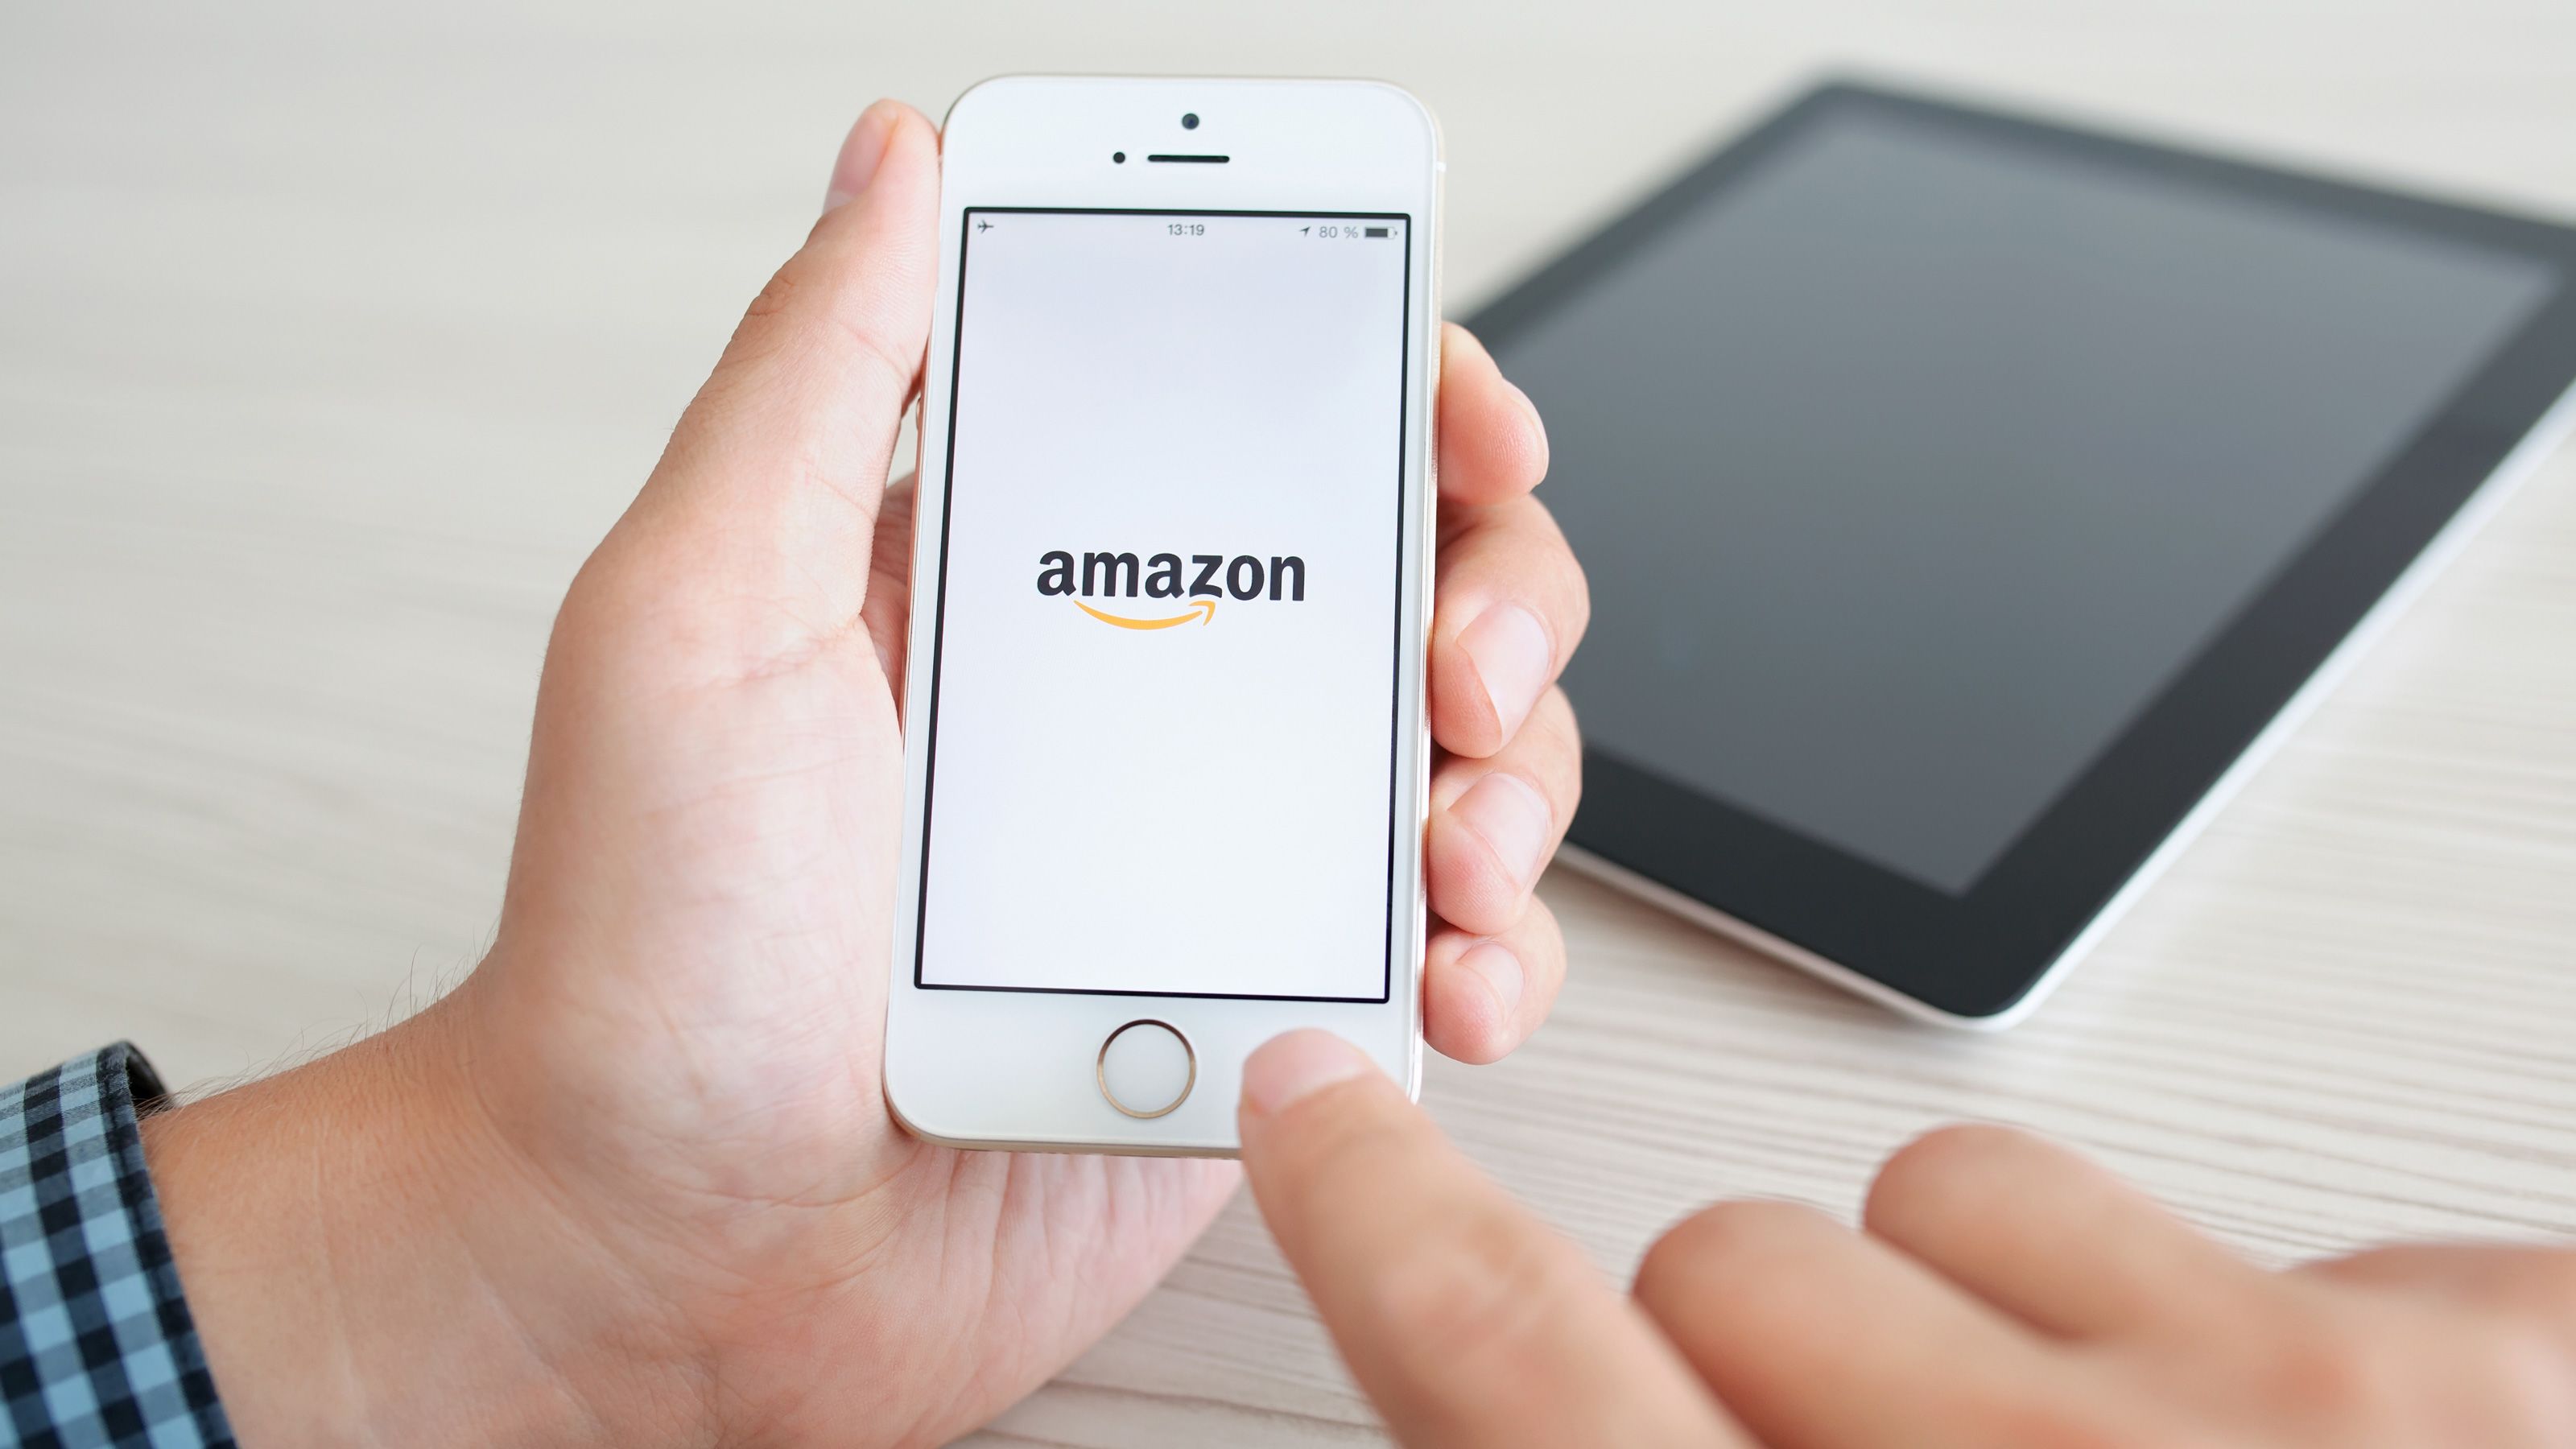 7 best credit cards for your Amazon purchases in 2022